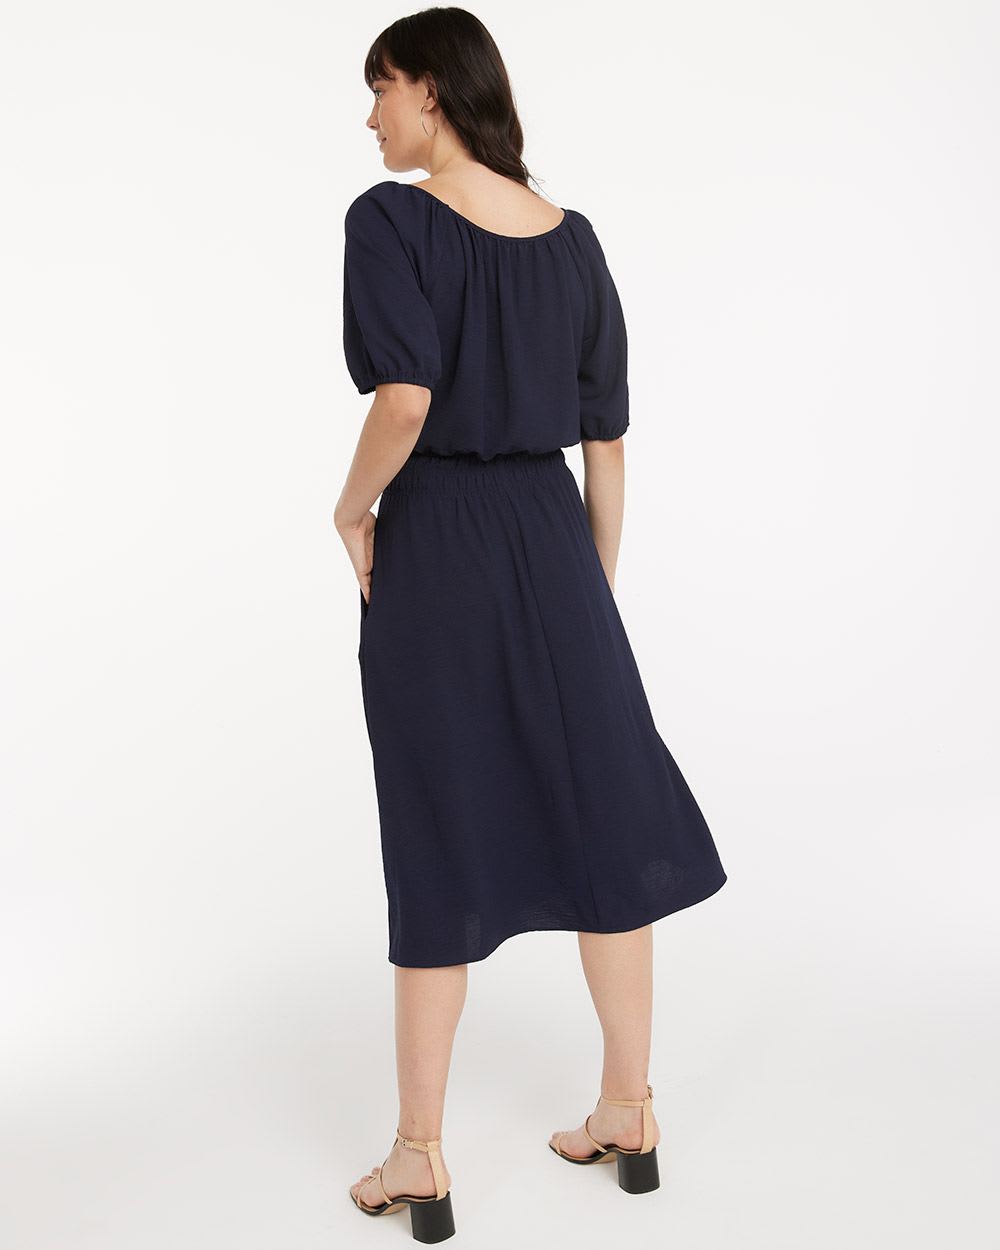 Fit and Flare Midi Dress with Short Puffy Sleeves, Connected Apparel